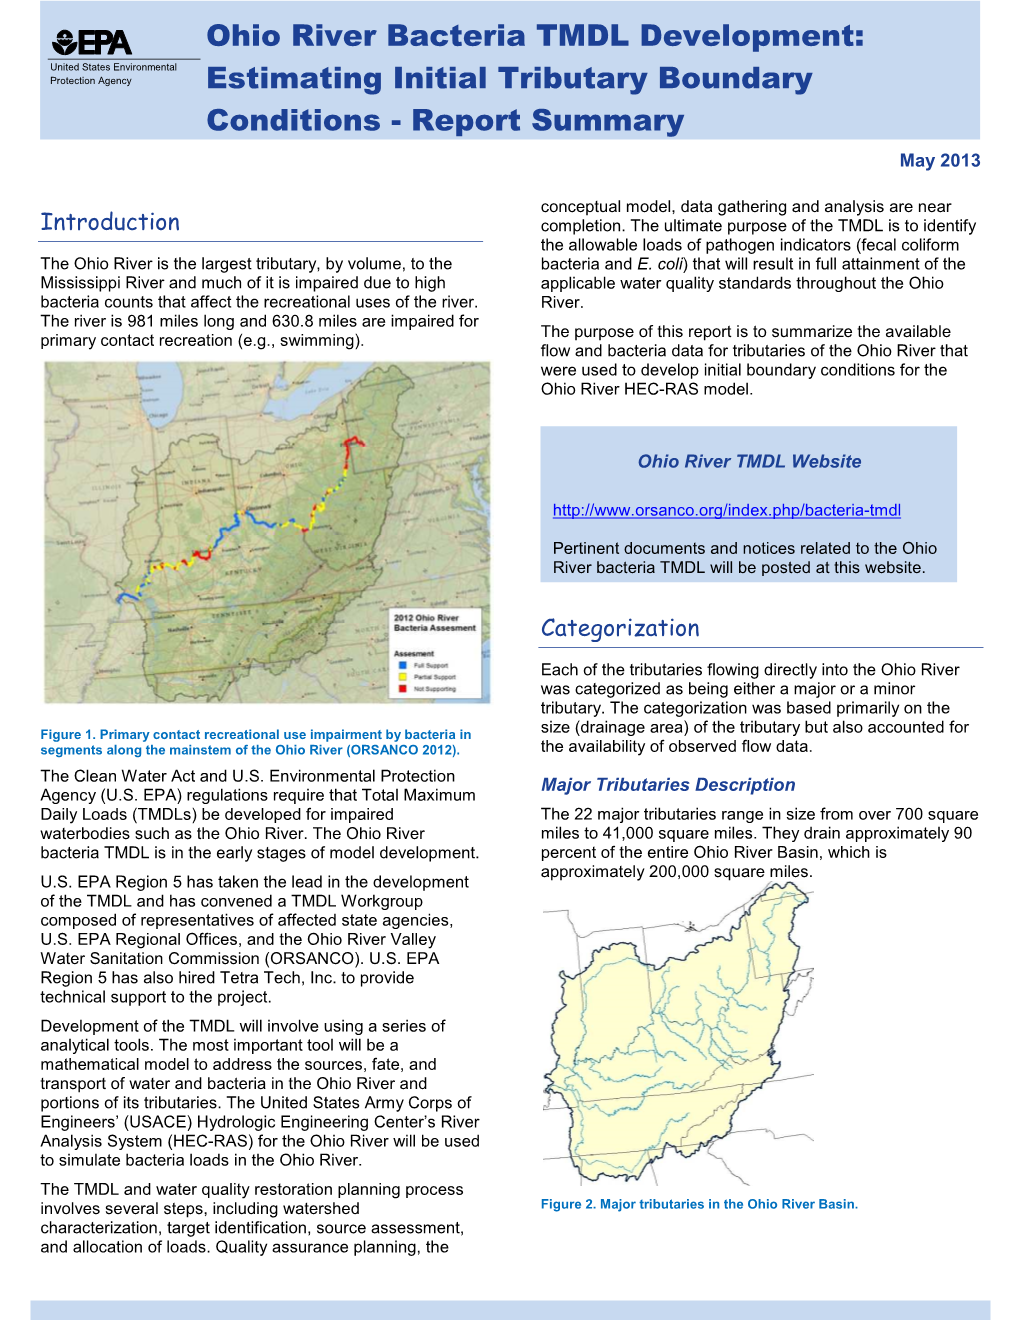 Ohio River Bacteria TMDL Development: Estimating Initial Tributary Boundary Conditions –Report Summary